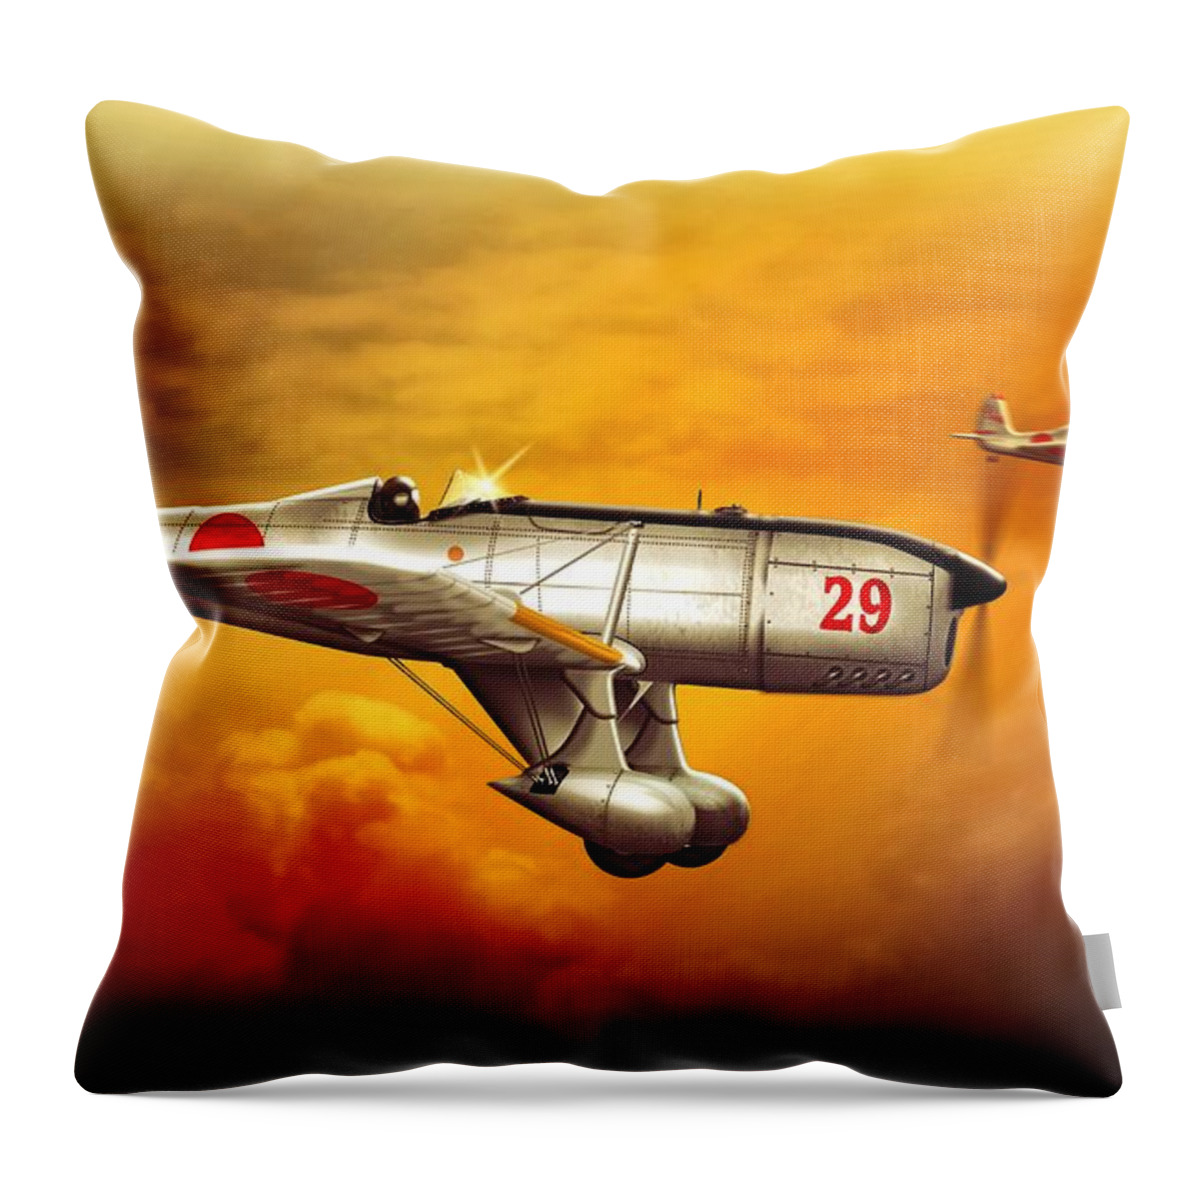 John Wills Art Throw Pillow featuring the digital art Ryan ST-A Captured Imperial Japanese Trainer by John Wills